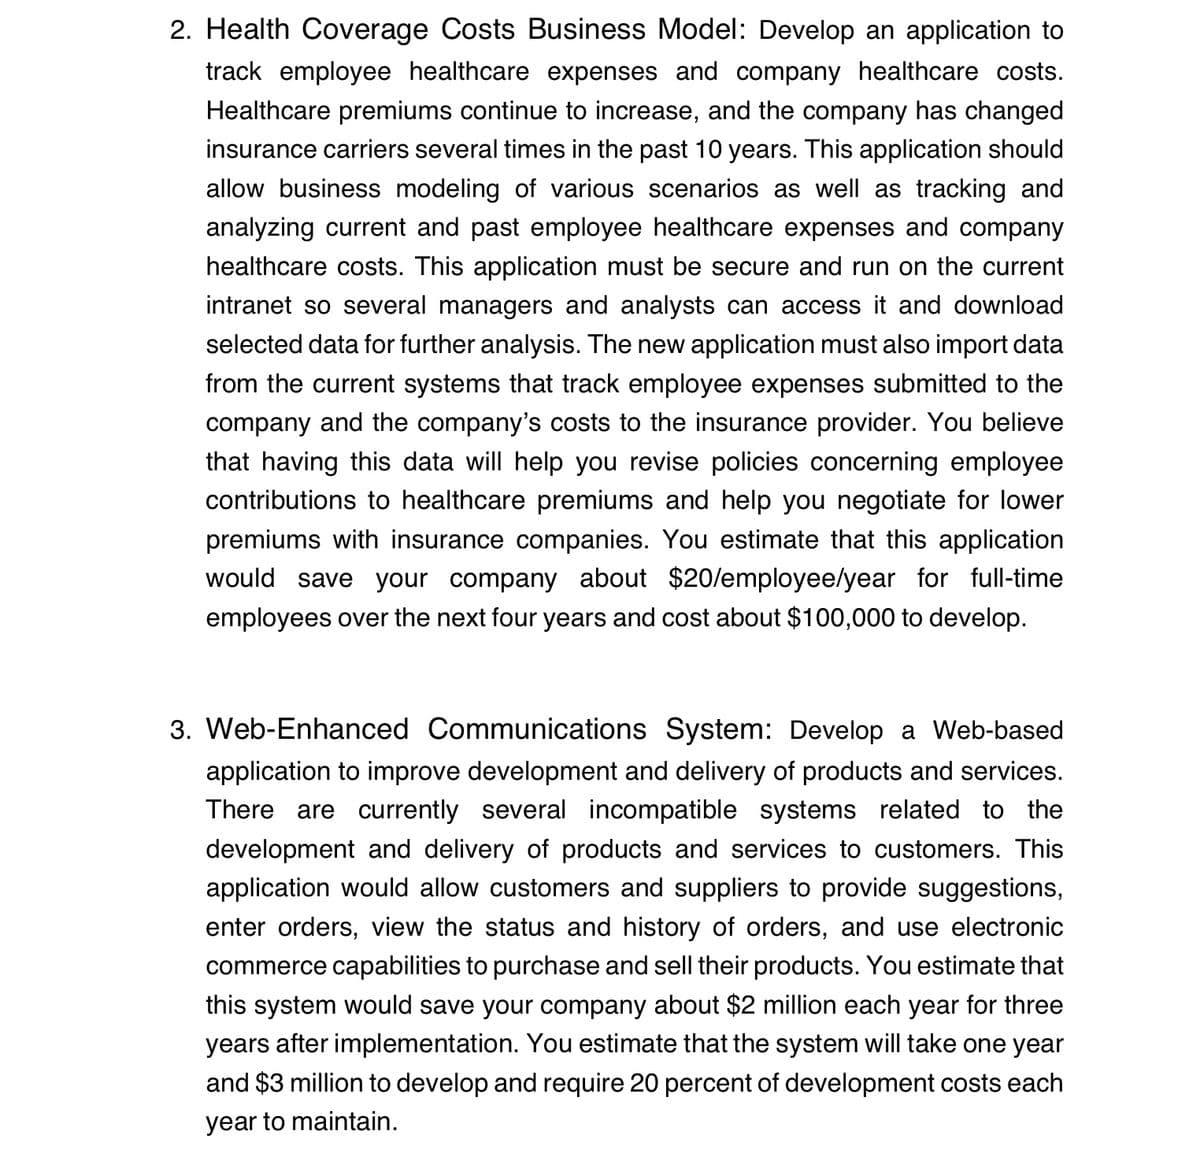 2. Health Coverage Costs Business Model: Develop an application to
track employee healthcare expenses and company healthcare costs.
Healthcare premiums continue to increase, and the company has changed
insurance carriers several times in the past 10 years. This application should
allow business modeling of various scenarios as well as tracking and
analyzing current and past employee healthcare expenses and company
healthcare costs. This application must be secure and run on the current
intranet so several managers and analysts can access it and download
selected data for further analysis. The new application must also import data
from the current systems that track employee expenses submitted to the
company and the company's costs to the insurance provider. You believe
that having this data will help you revise policies concerning employee
contributions to healthcare premiums and help you negotiate for lower
premiums with insurance companies. You estimate that this application
would save your company about $20/employee/year for full-time
employees over the next four years and cost about $100,000 to develop.
3. Web-Enhanced Communications System: Develop a Web-based
application to improve development and delivery of products and services.
There are currently several incompatible systems related to the
development and delivery of products and services to customers. This
application would allow customers and suppliers to provide suggestions,
enter orders, view the status and history of orders, and use electronic
commerce capabilities to purchase and sell their products. You estimate that
this system would save your company about $2 million each year for three
years after implementation. You estimate that the system will take one year
and $3 million to develop and require 20 percent of development costs each
year to maintain.